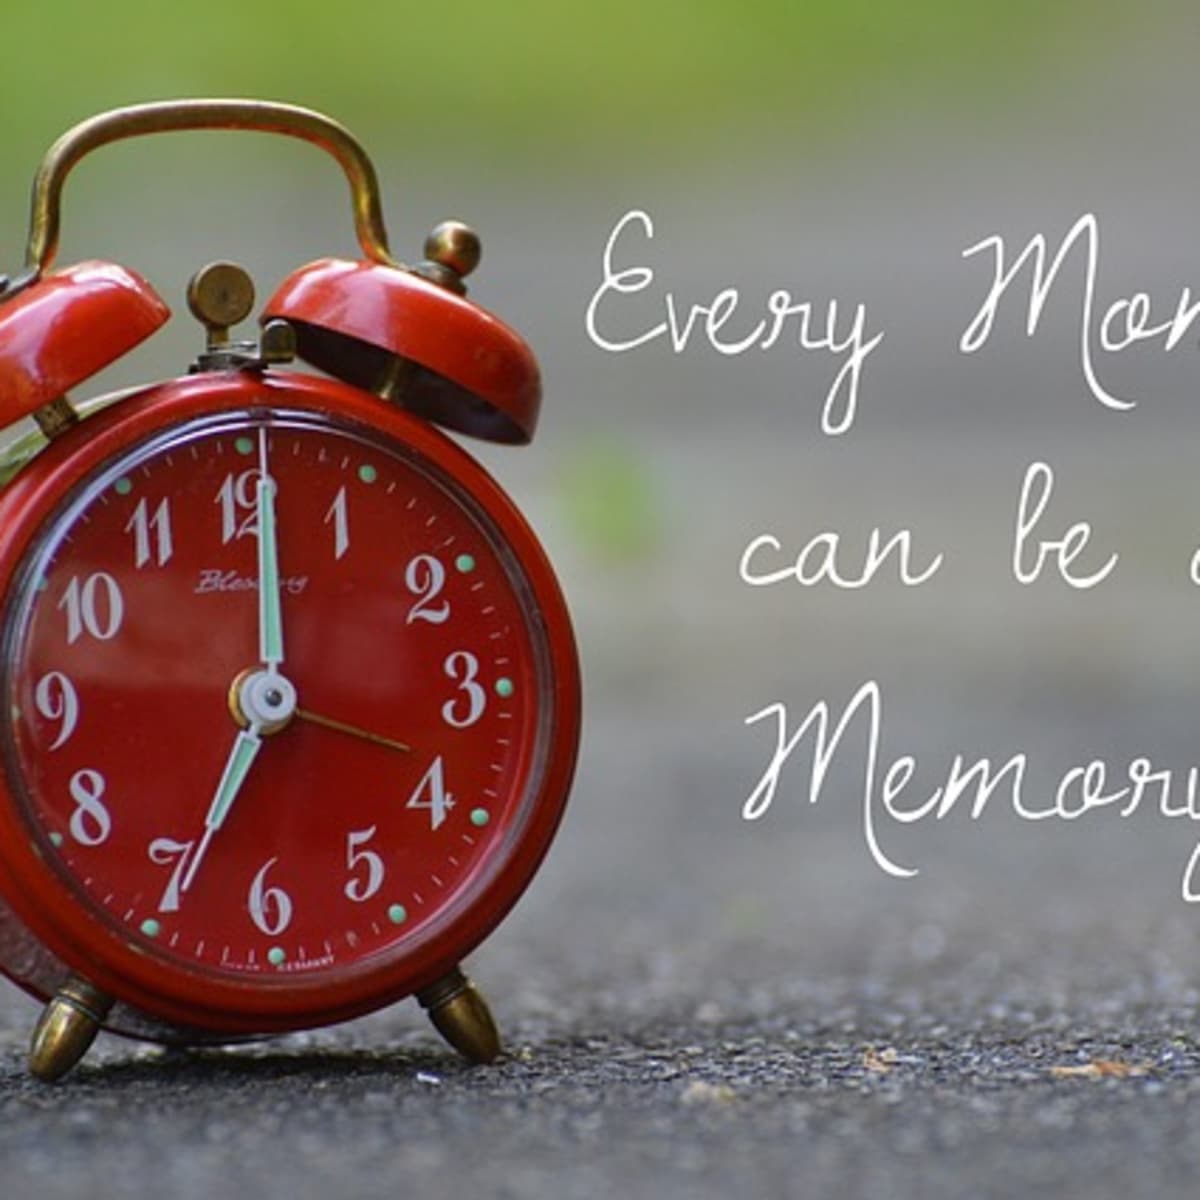 Memory Memories And Remember Quotes And Sayings Hubpages